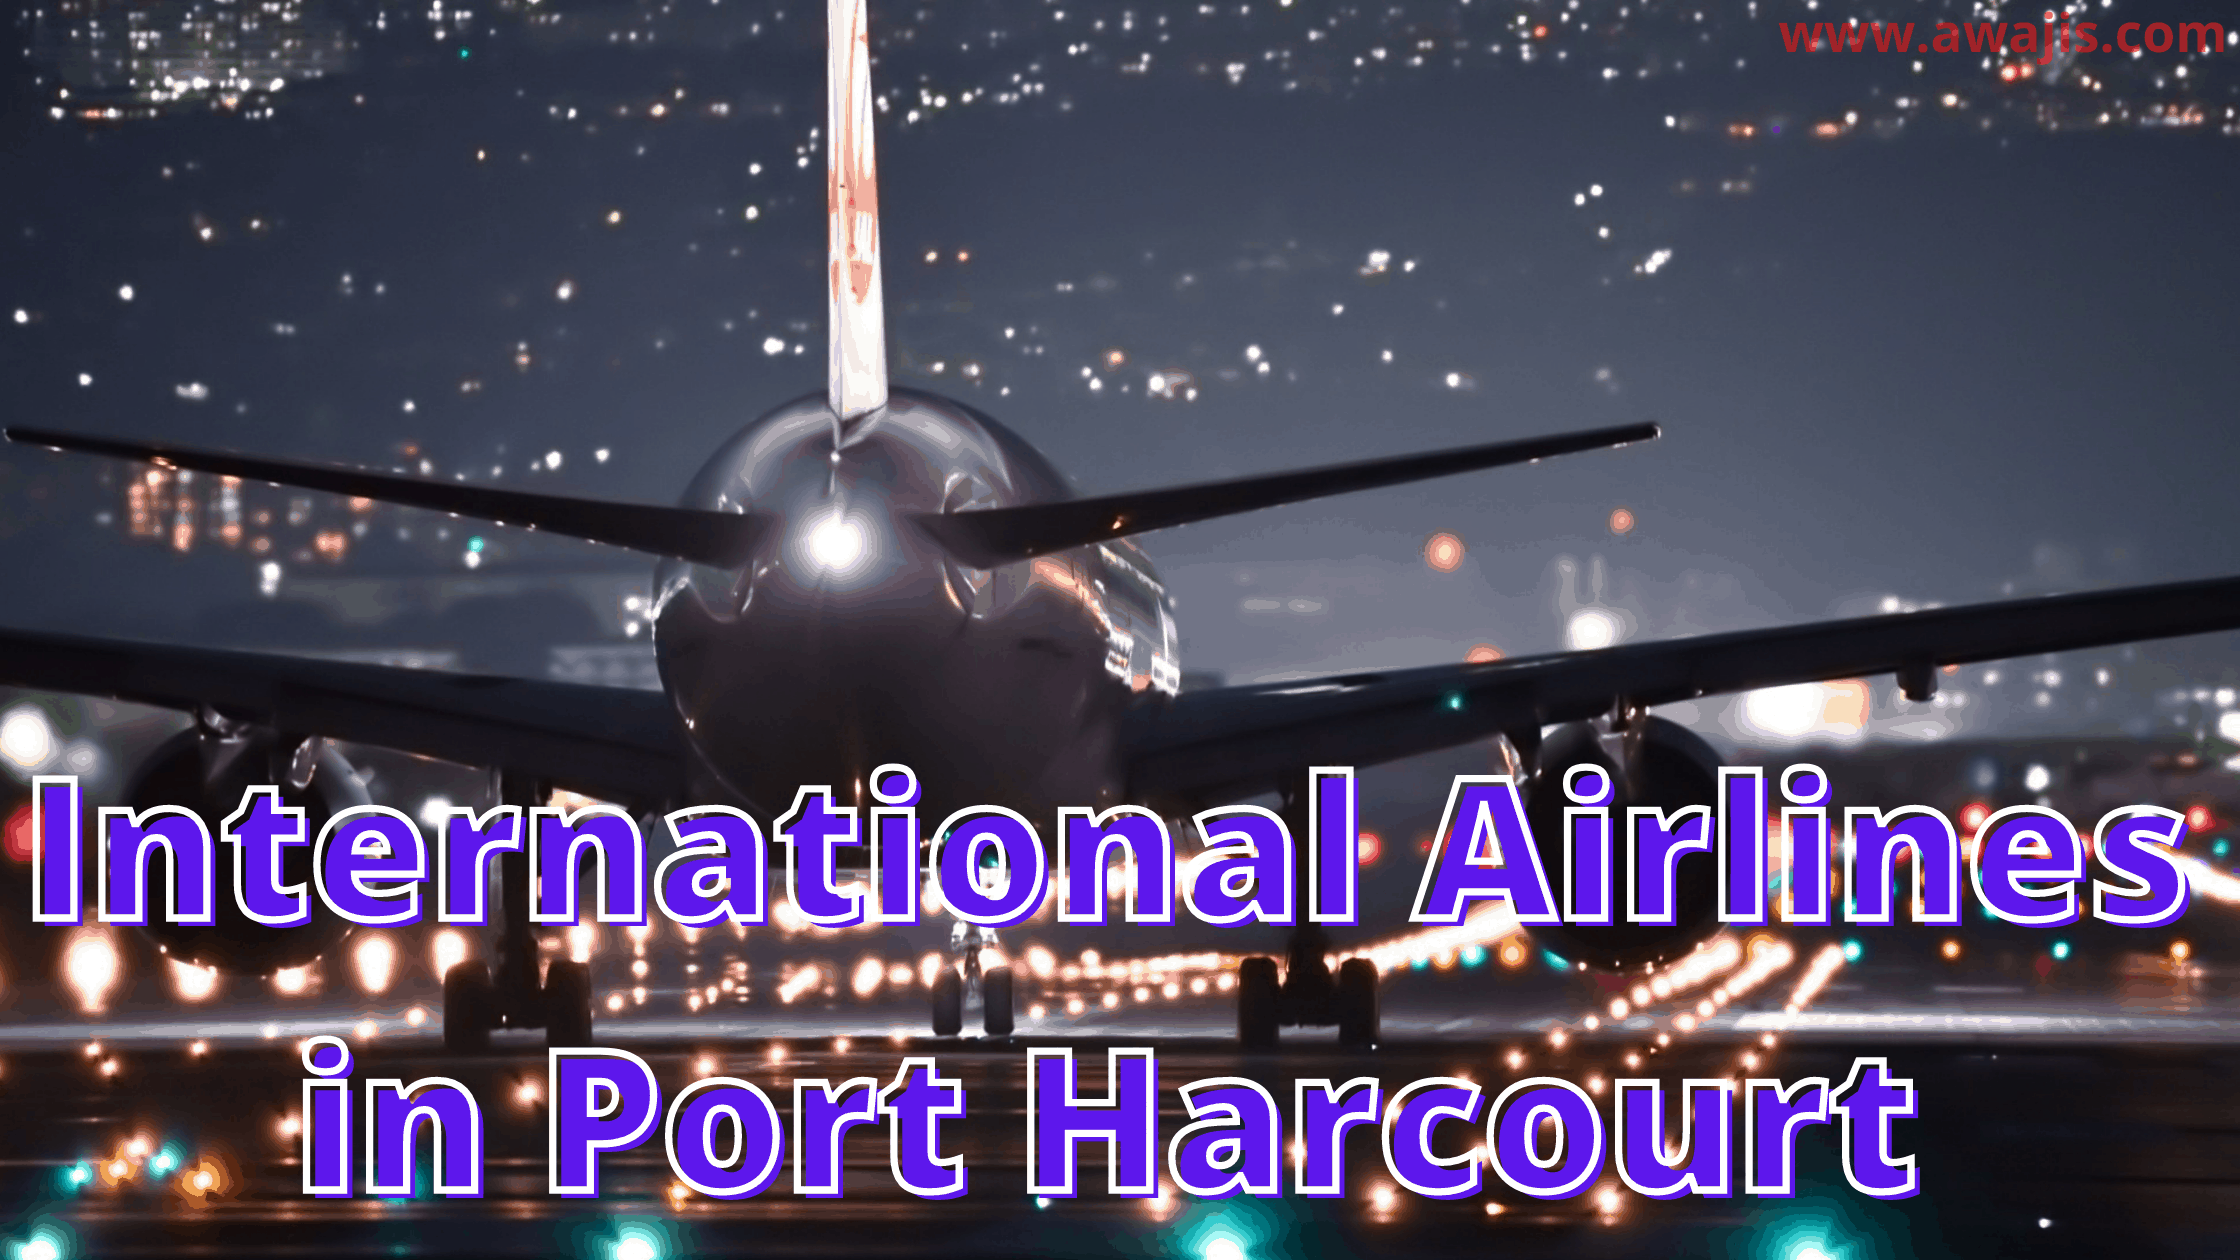 International Airlines in Port Harcourt